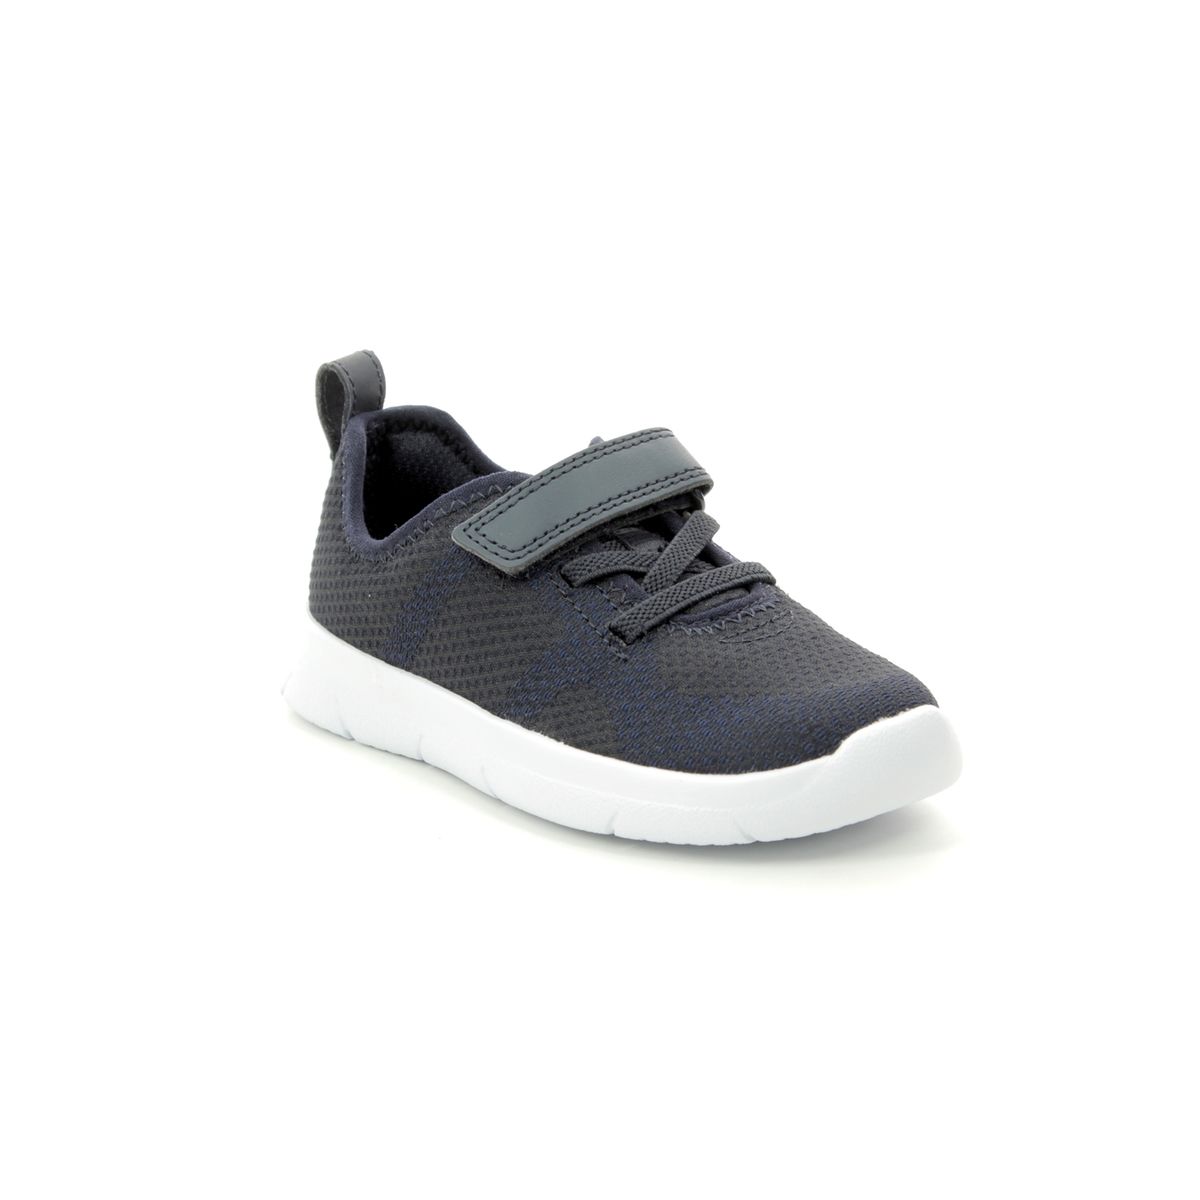 Clarks Ath Flux T Navy Kids Toddler Boys Trainers 412697G In Size 9 In Plain Navy G Width Fitting For kids